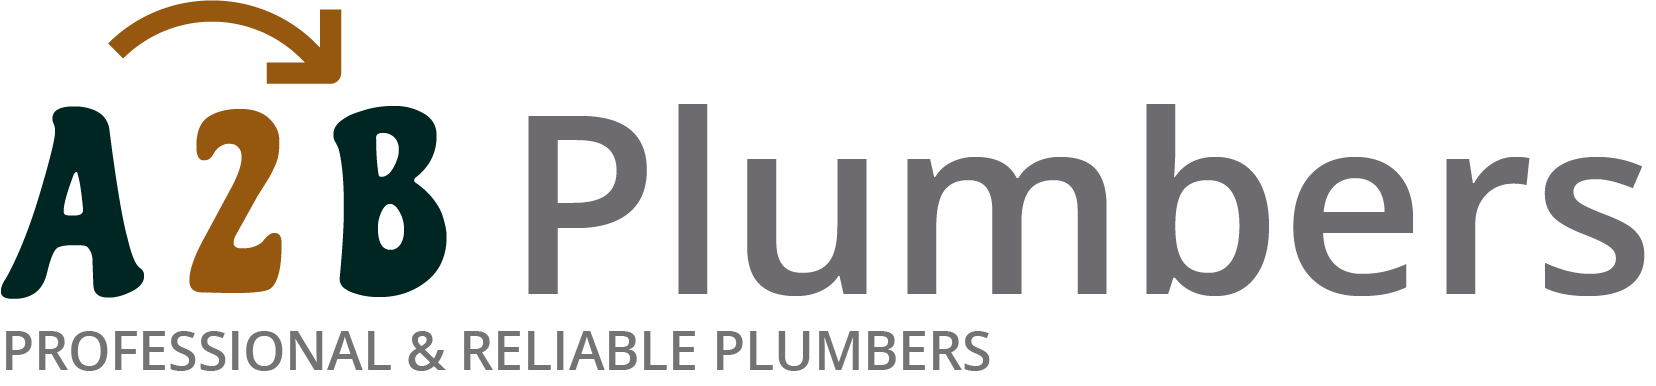 If you need a boiler installed, a radiator repaired or a leaking tap fixed, call us now - we provide services for properties in Ruxley and the local area.